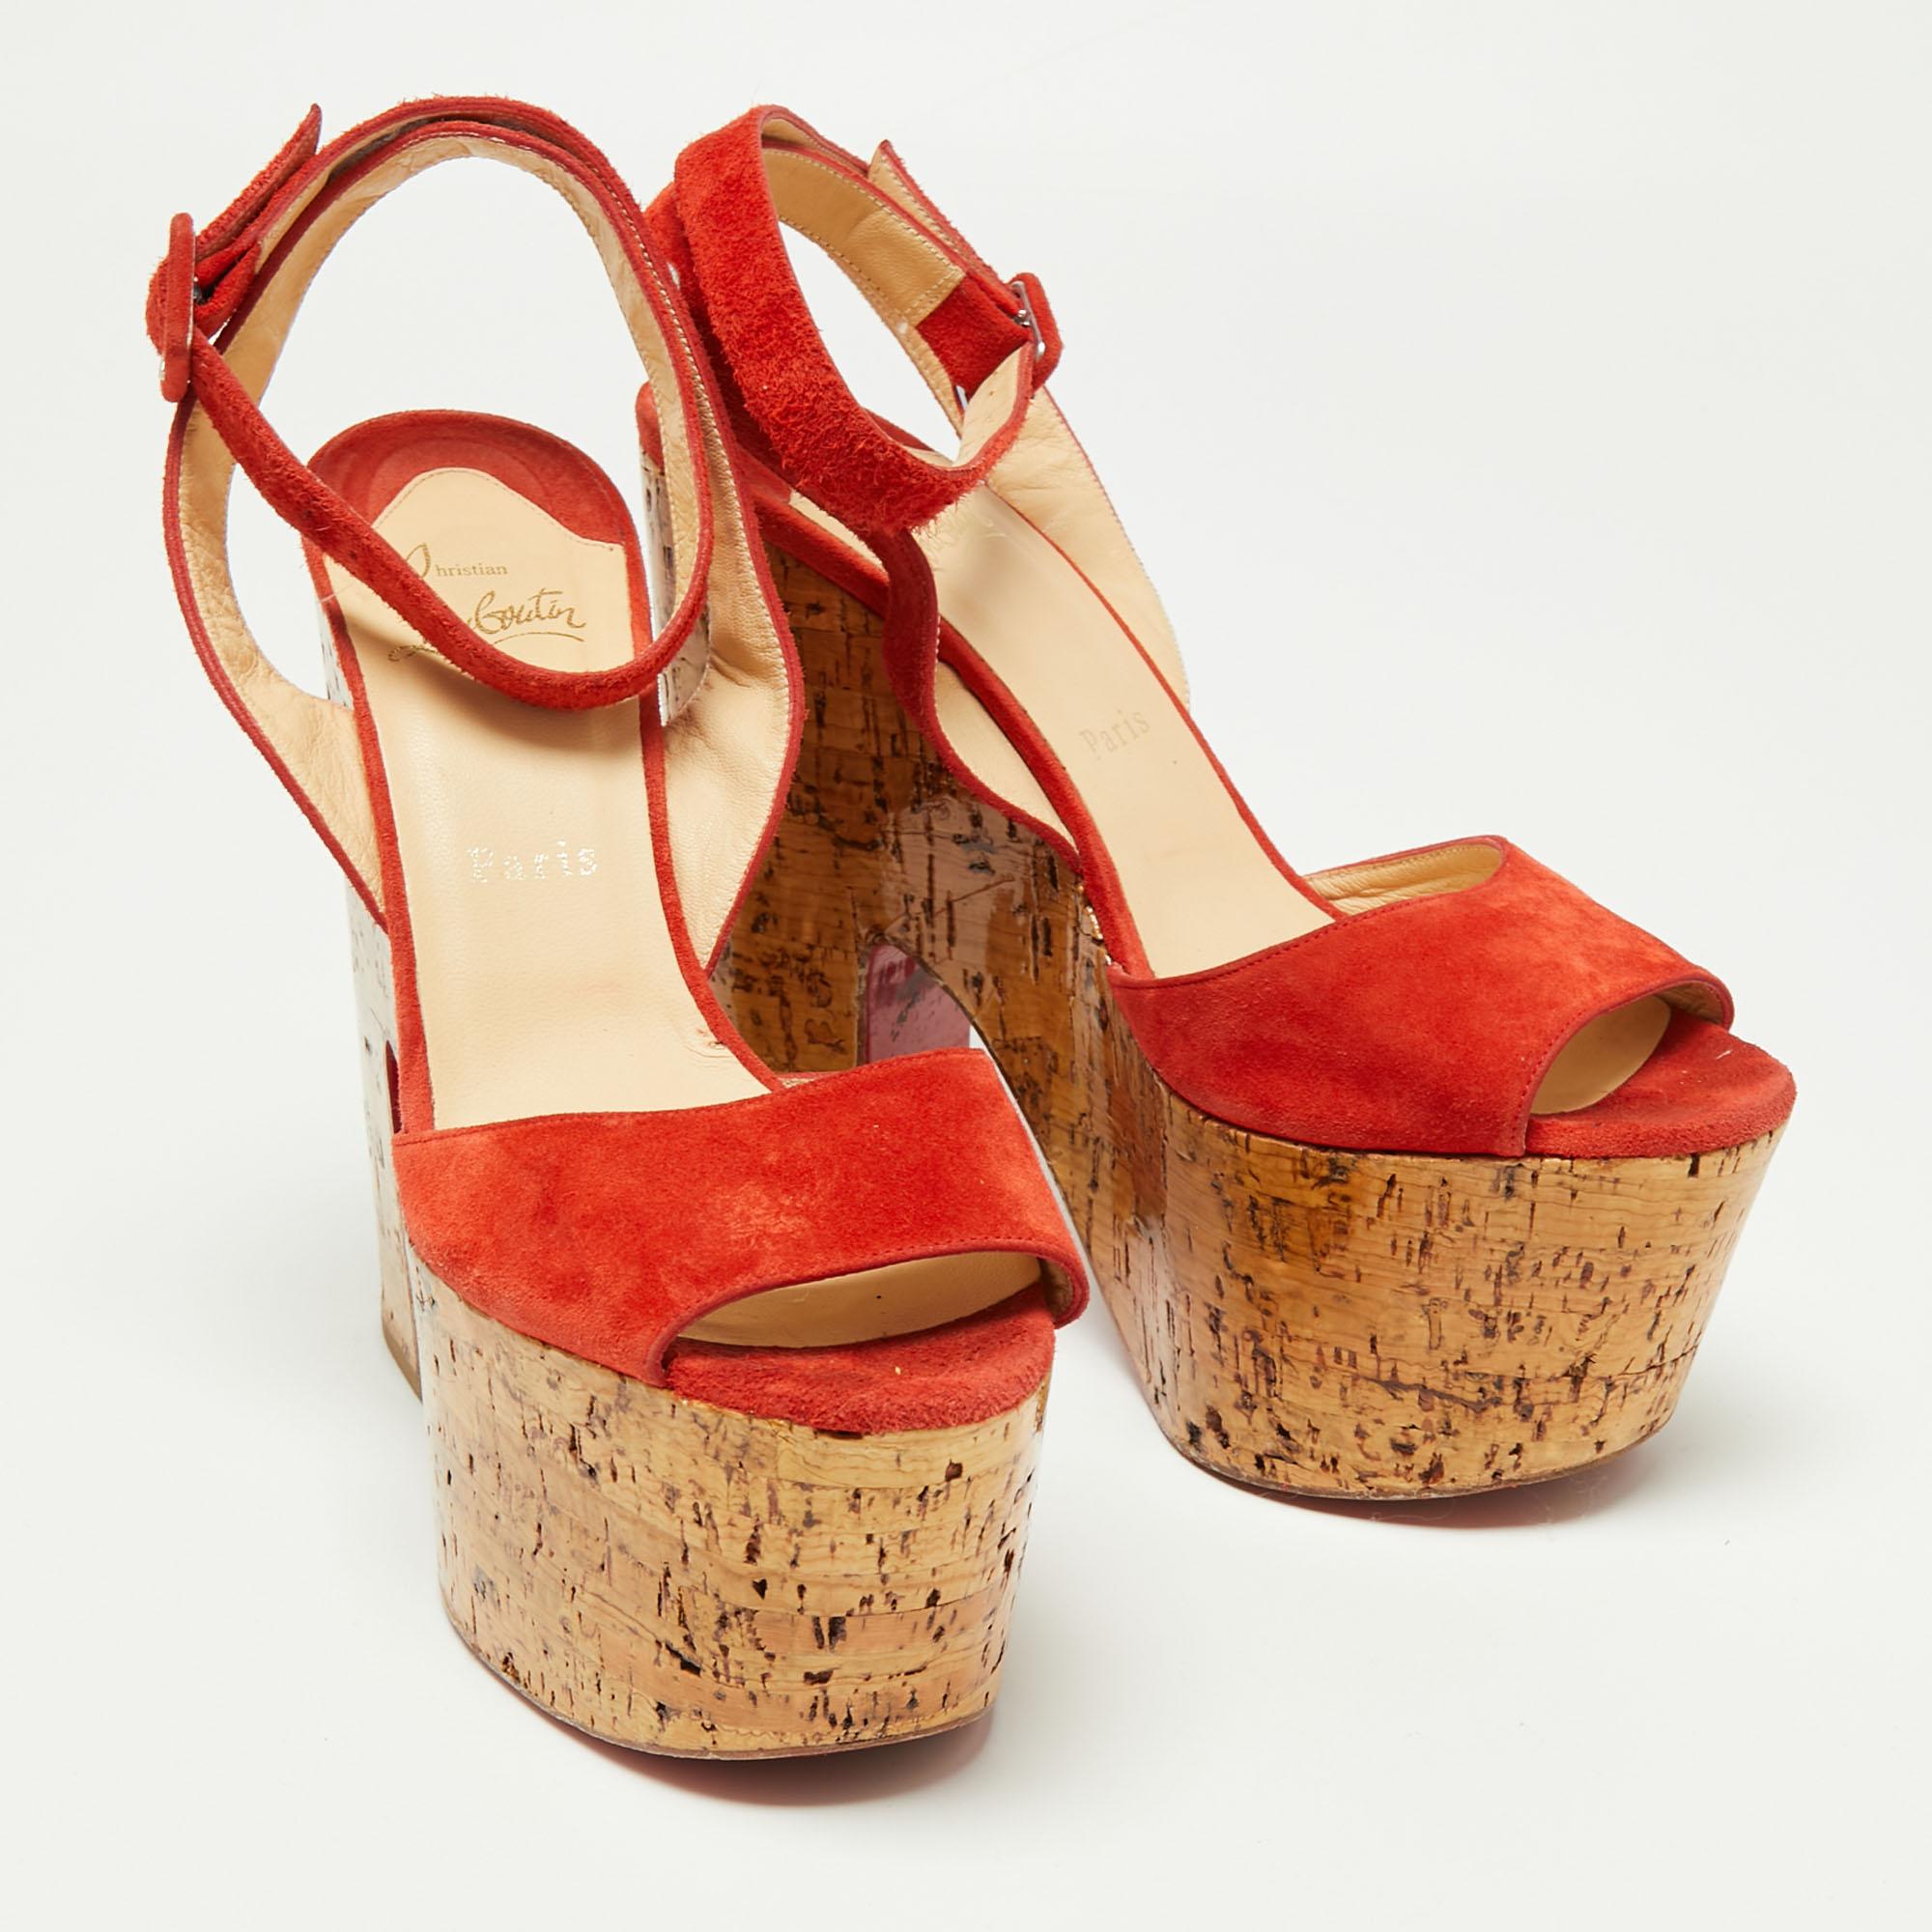 Christian Louboutin Suede Super Dombasle Cork Wedge Ankle Strap Sandals Size 40 1